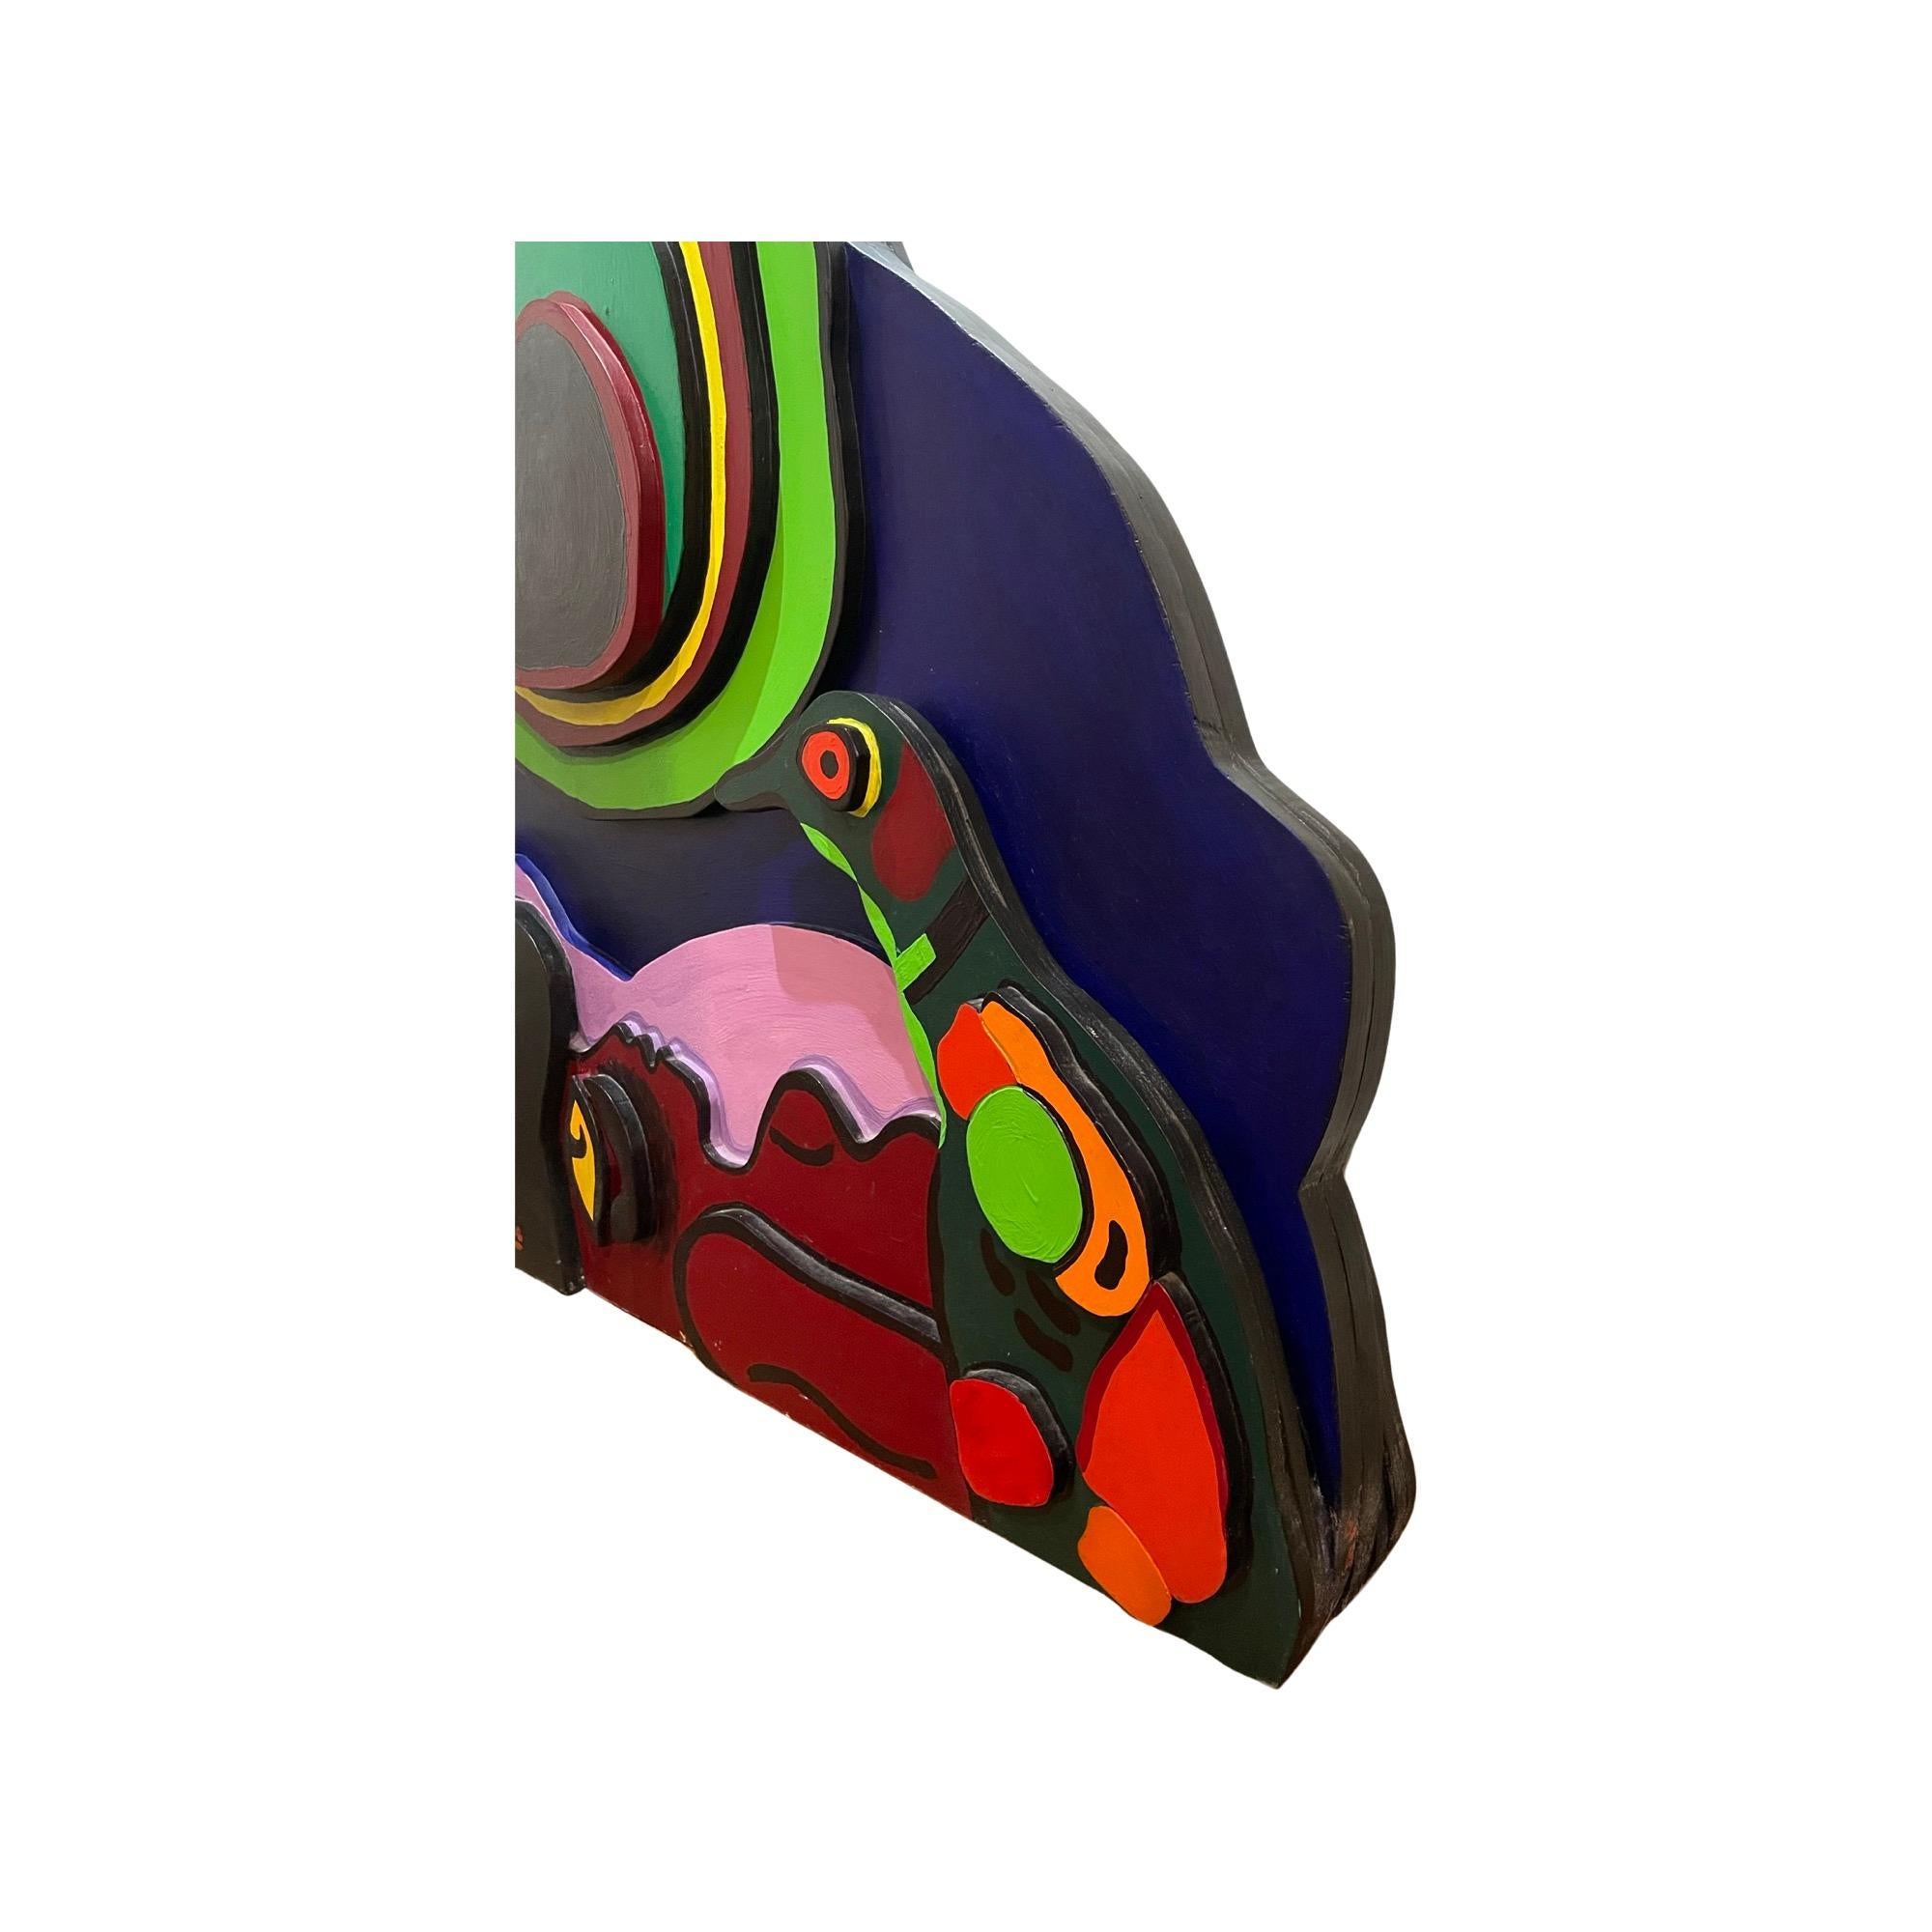 COBRA Post War Expressionist 3 Dimensional Two Sided Large Sculpture COLORFUL  For Sale 1